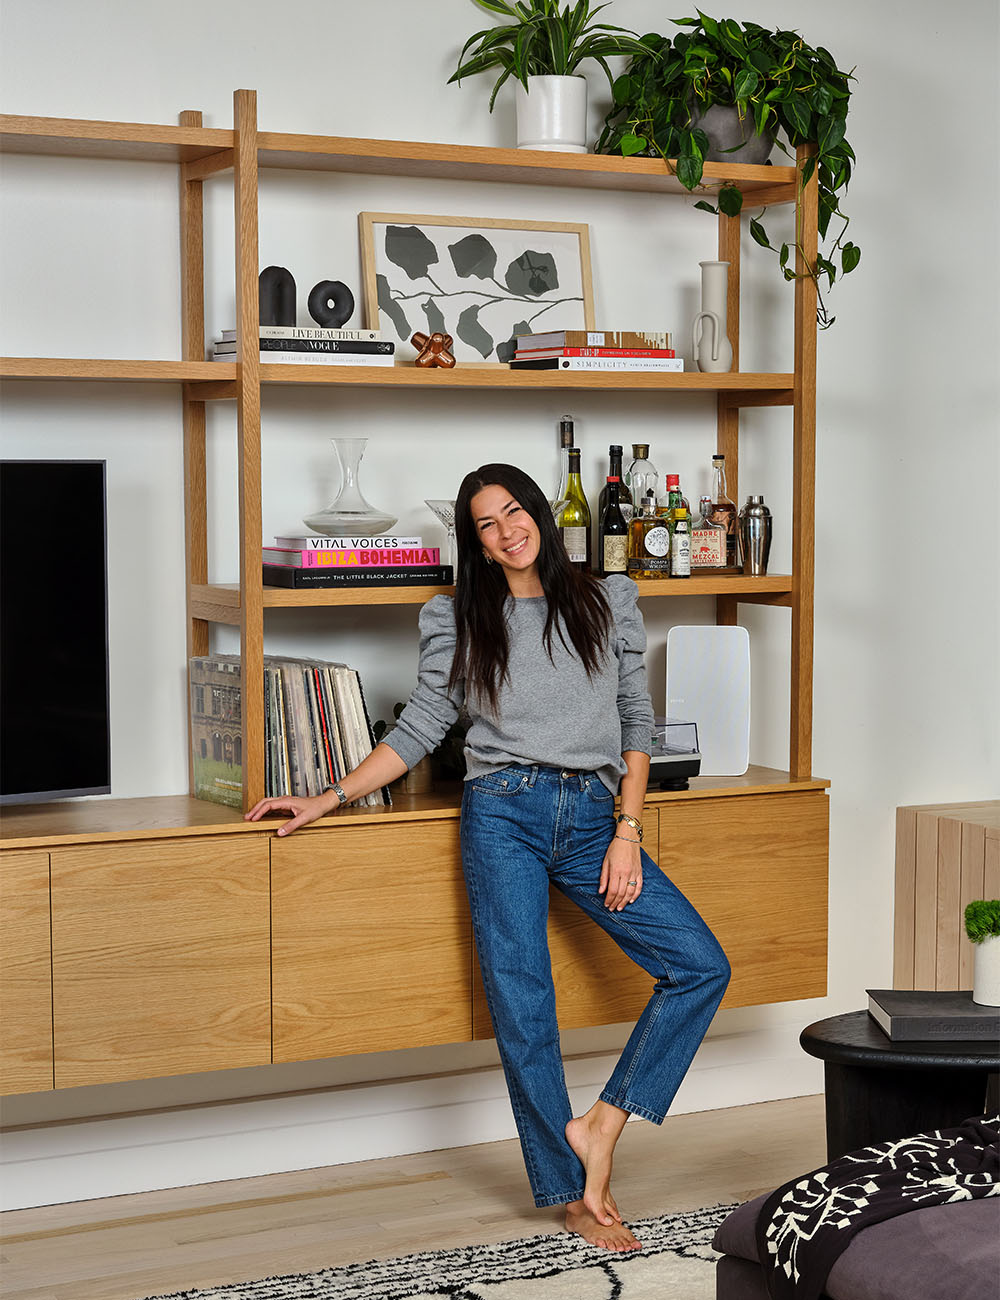 Rebecca Minkoff Wants You To Build a Satisfying Life